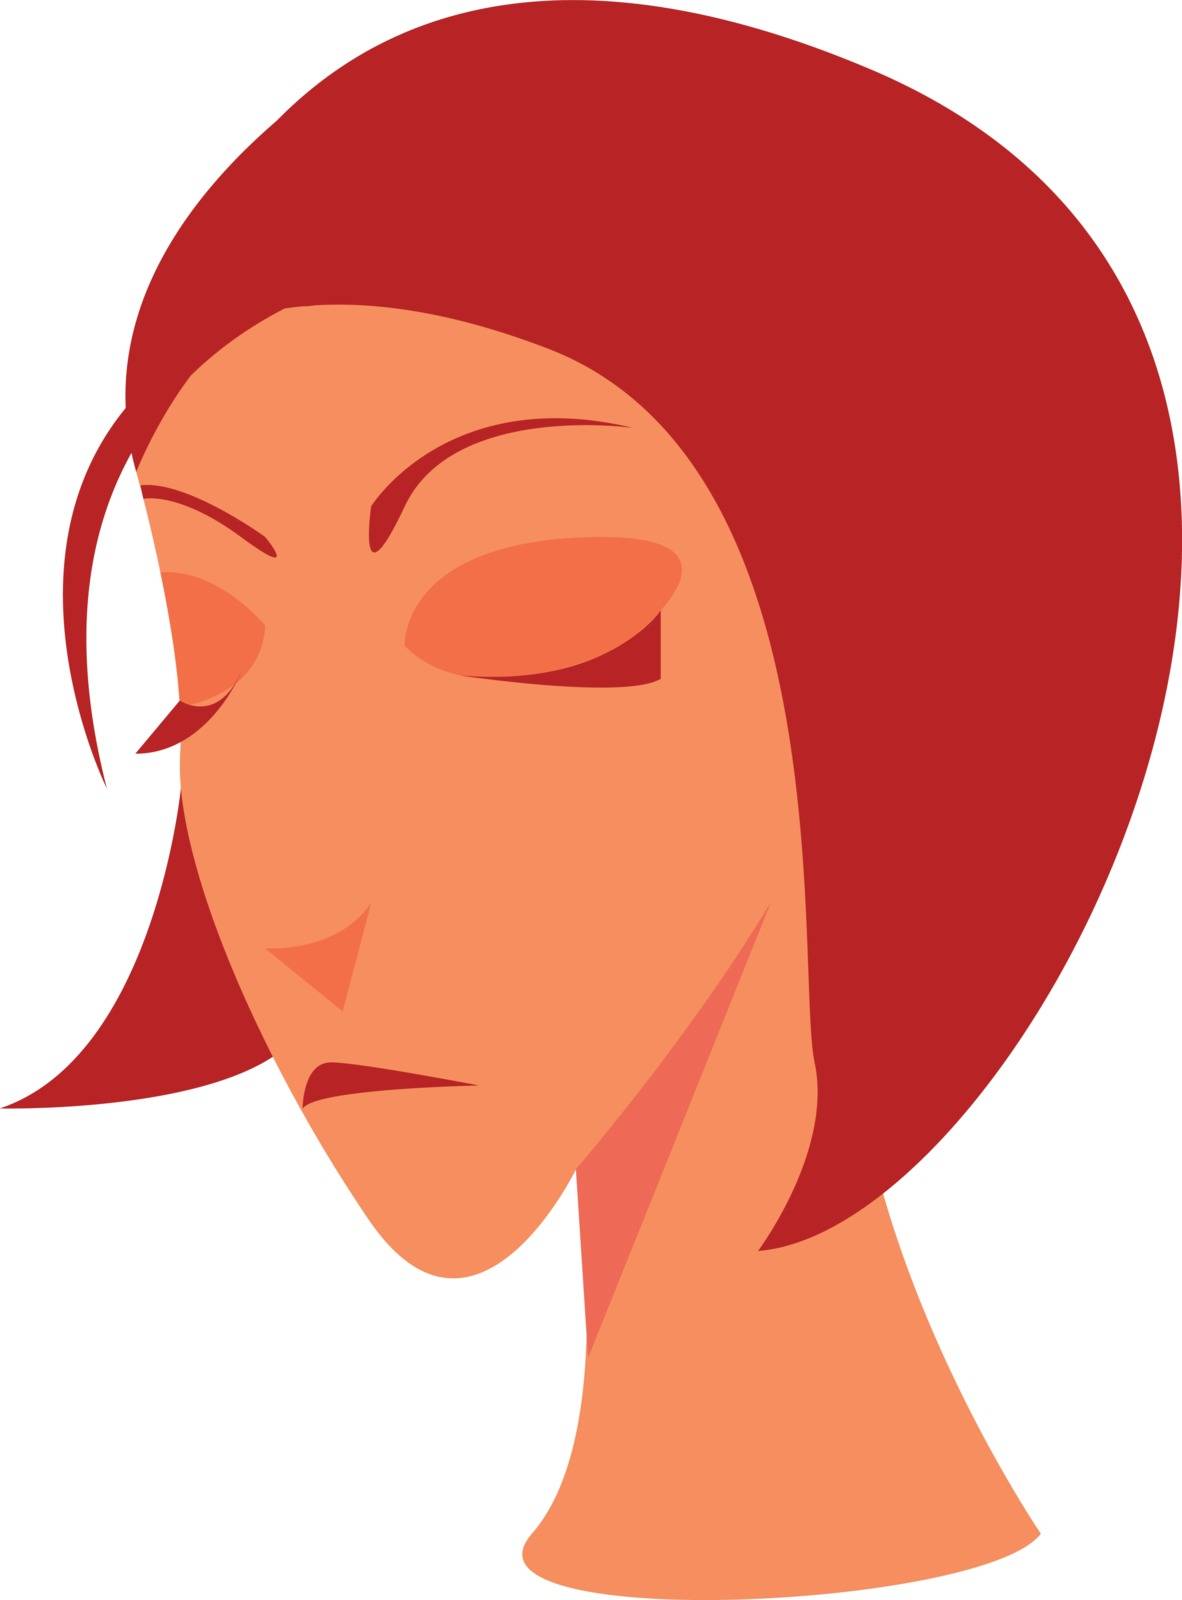 A gloomy looking woman with red hair vector color drawing or illustration